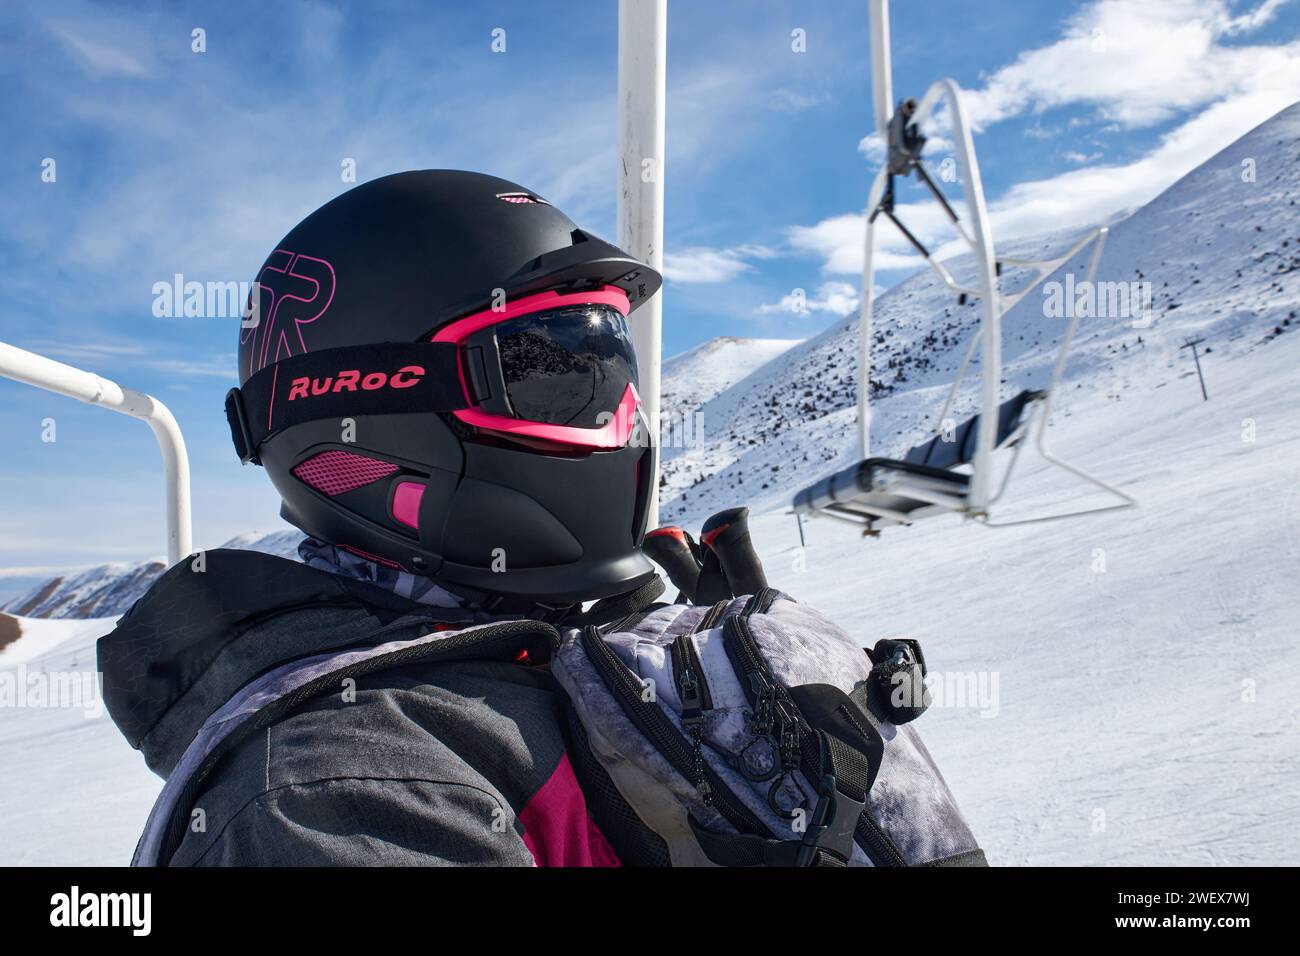 RuRoc stylish full face snow helmet black and pink color goggles. Man at ski cable car mountain lift, in snowboard winter equipment with backpack. Res Stock Photo